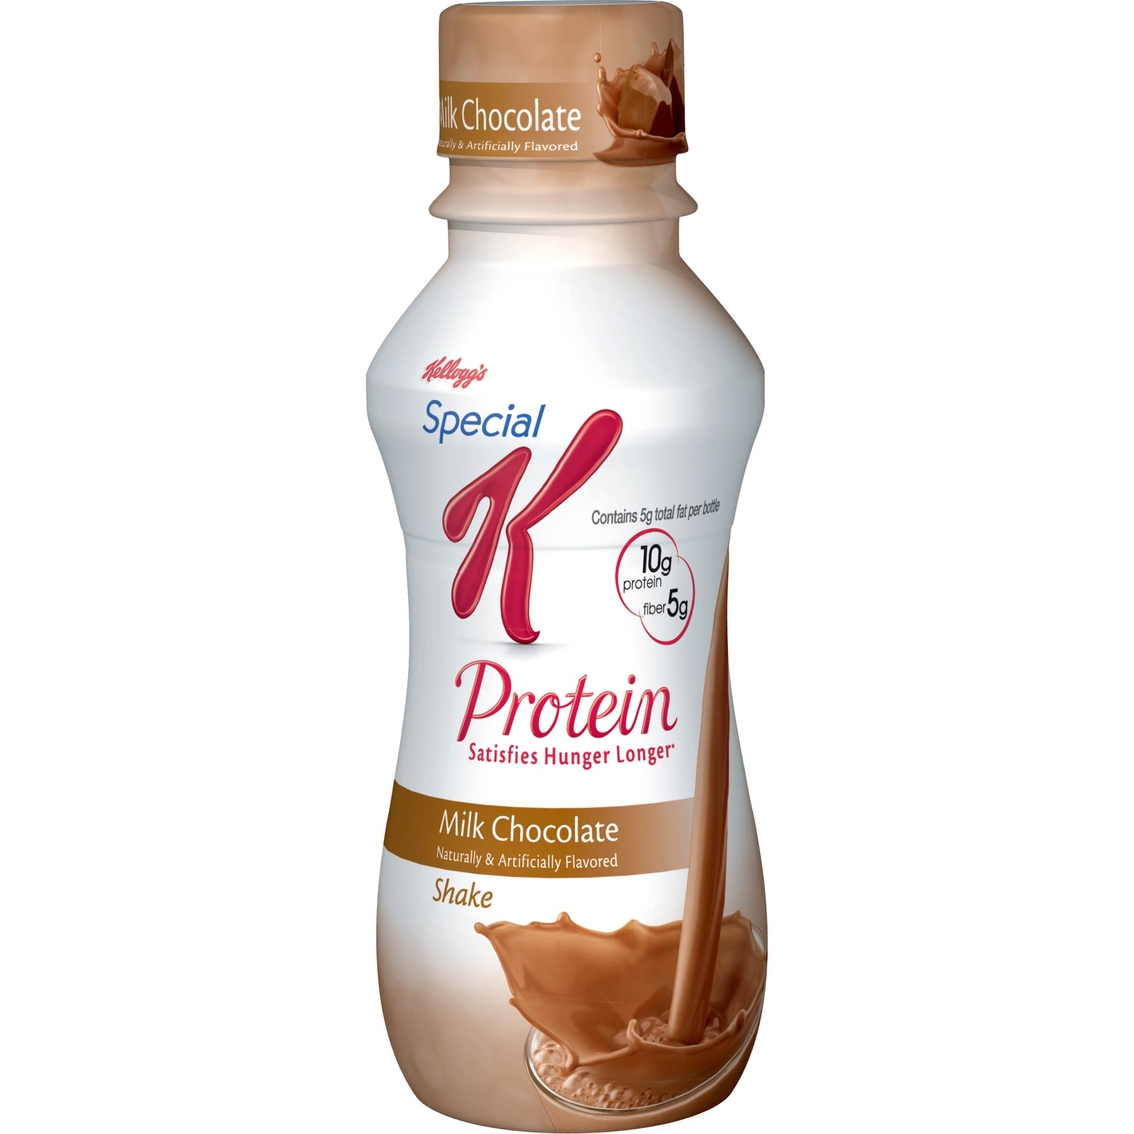 Special K Protein Shake 4 pk. - Image 2 of 2